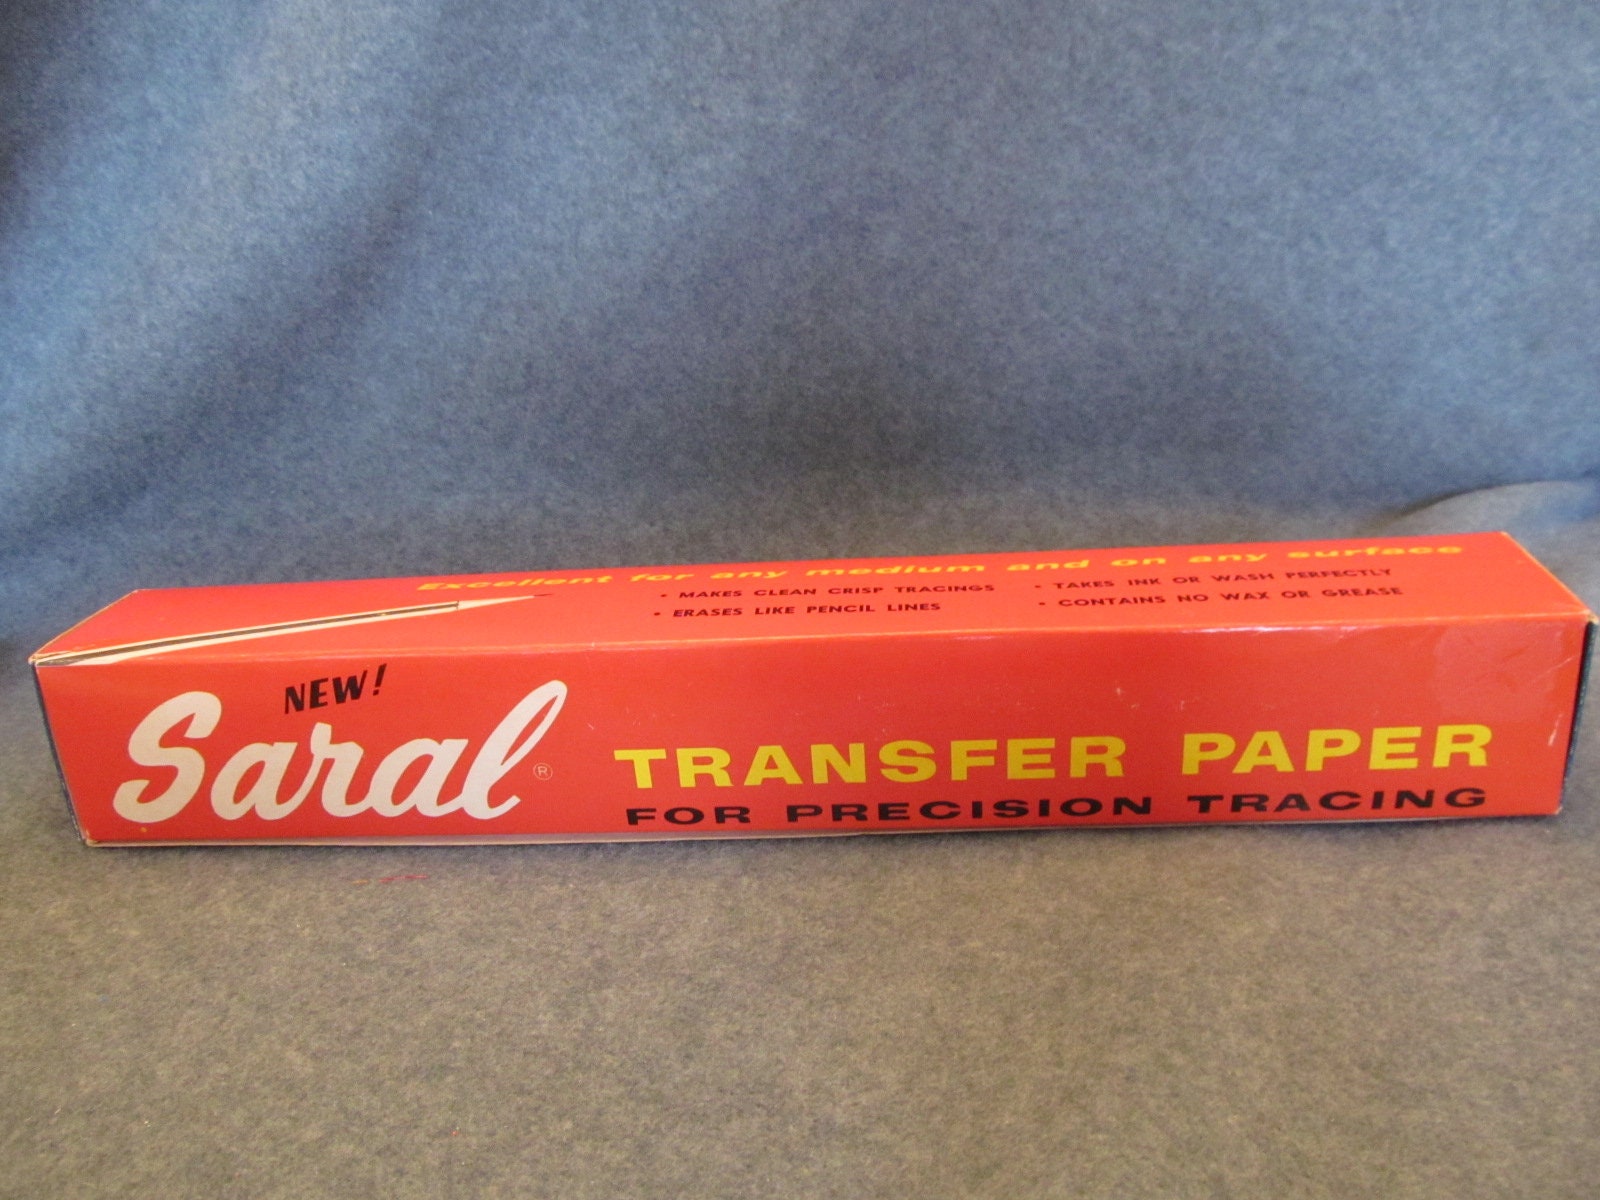 Saral Transfer Paper, Graphite Color, Crafting Supply, Makes Clean